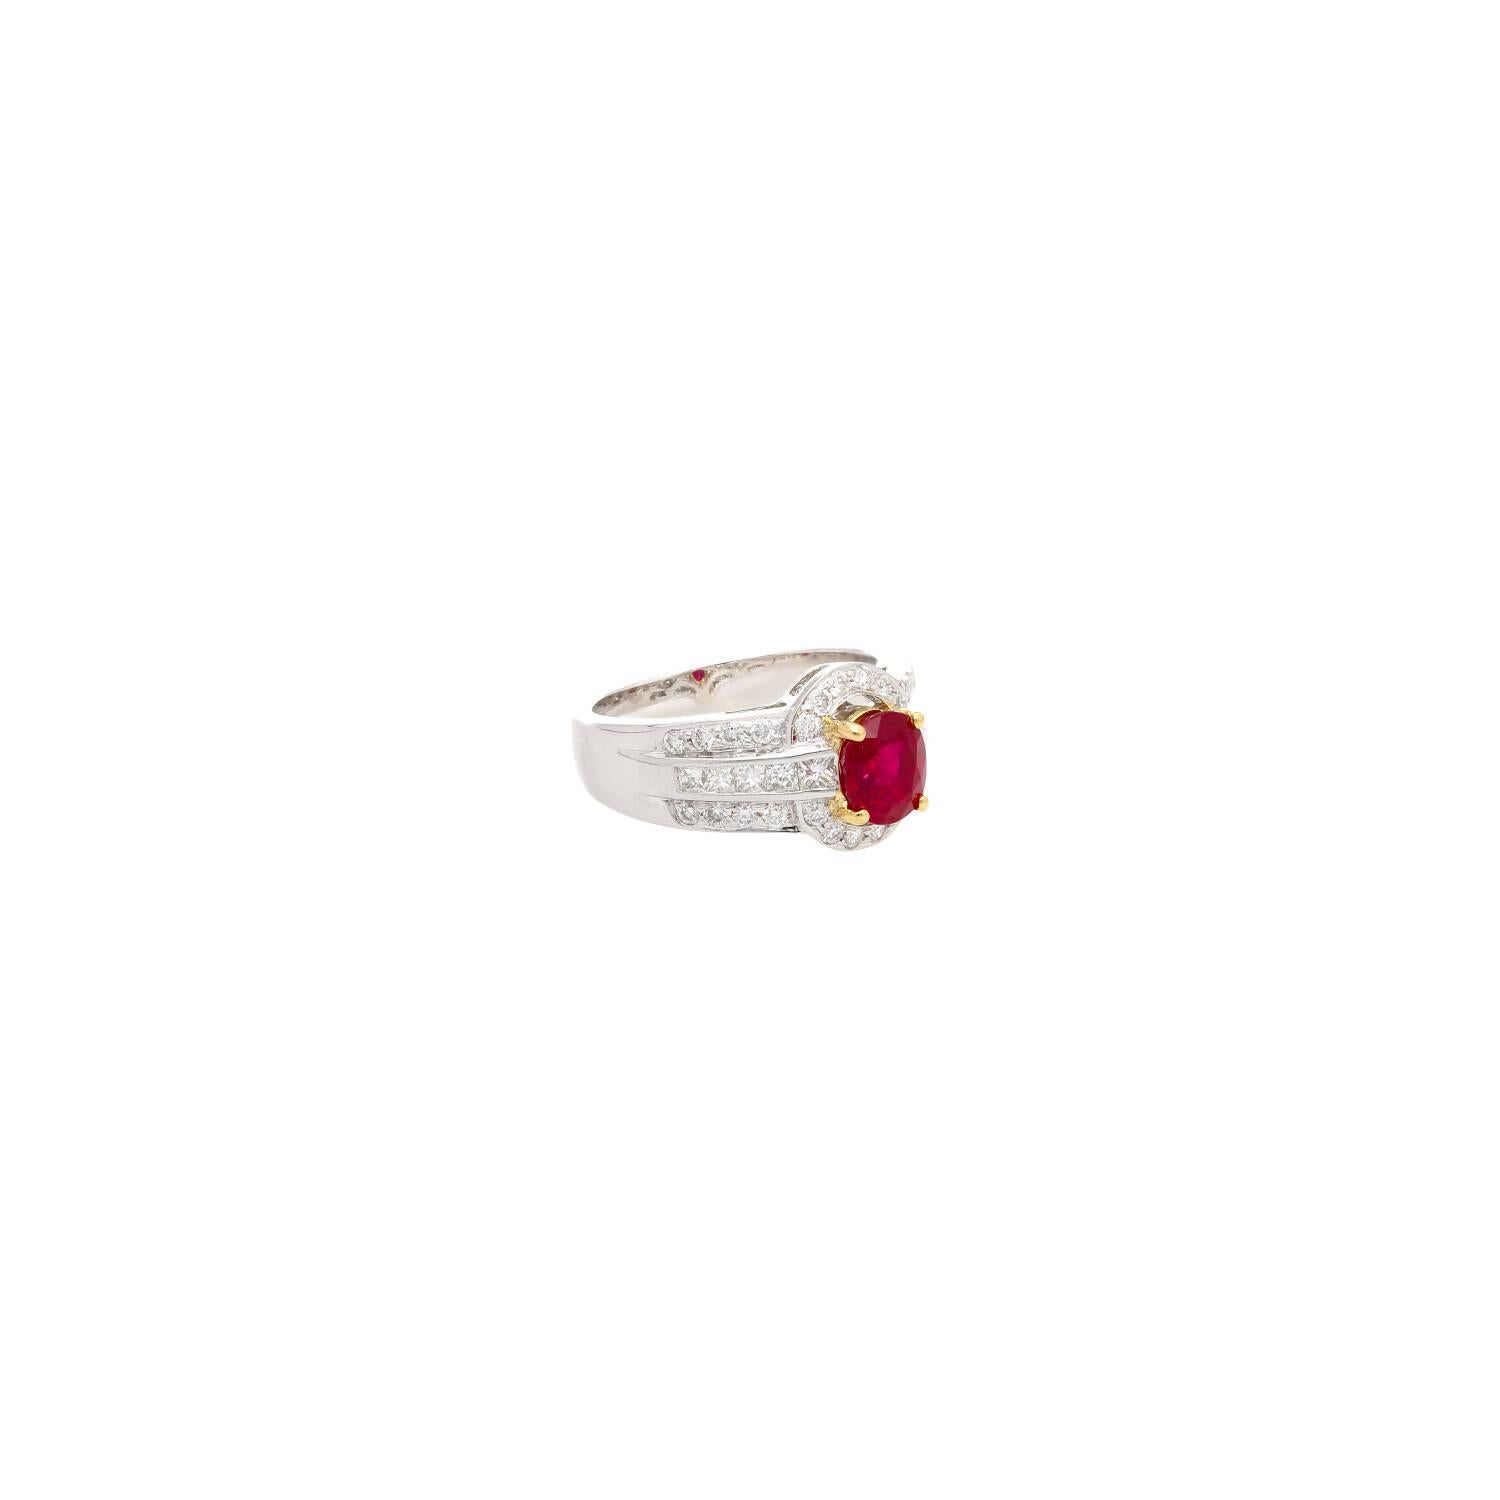 GRS Certified 1.37 Carat Burma Pigeon Blood Ruby & Diamond Ring in 18K Gold For Sale 3